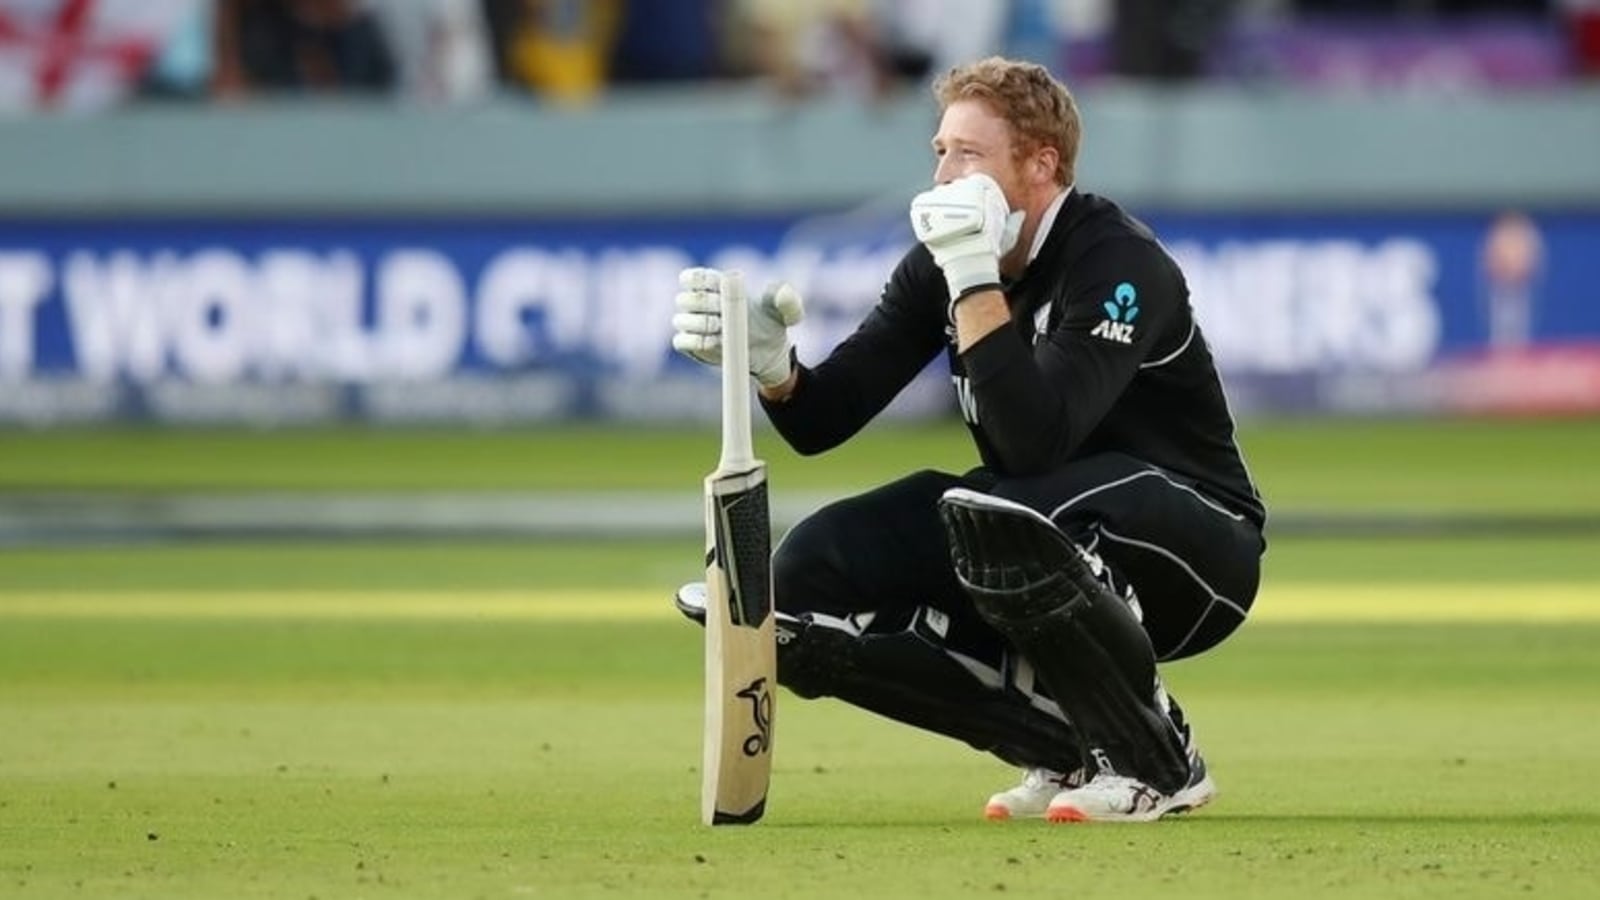 Martin Guptill says "When I came off the field after batting" in T20 World Cup